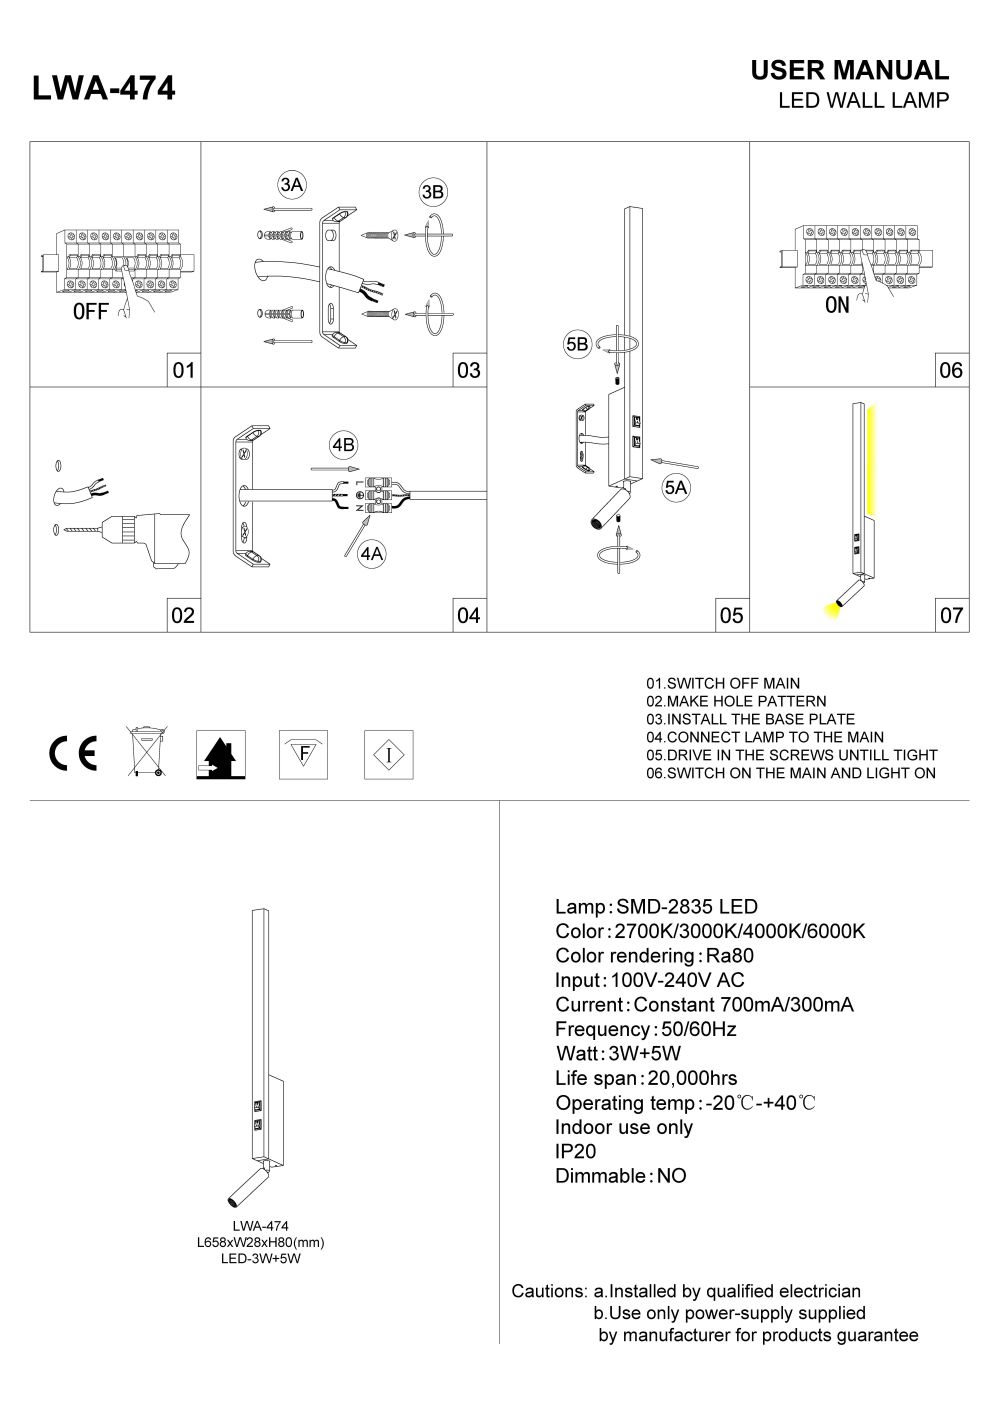 LWA-474 LED wall light with separate reading light